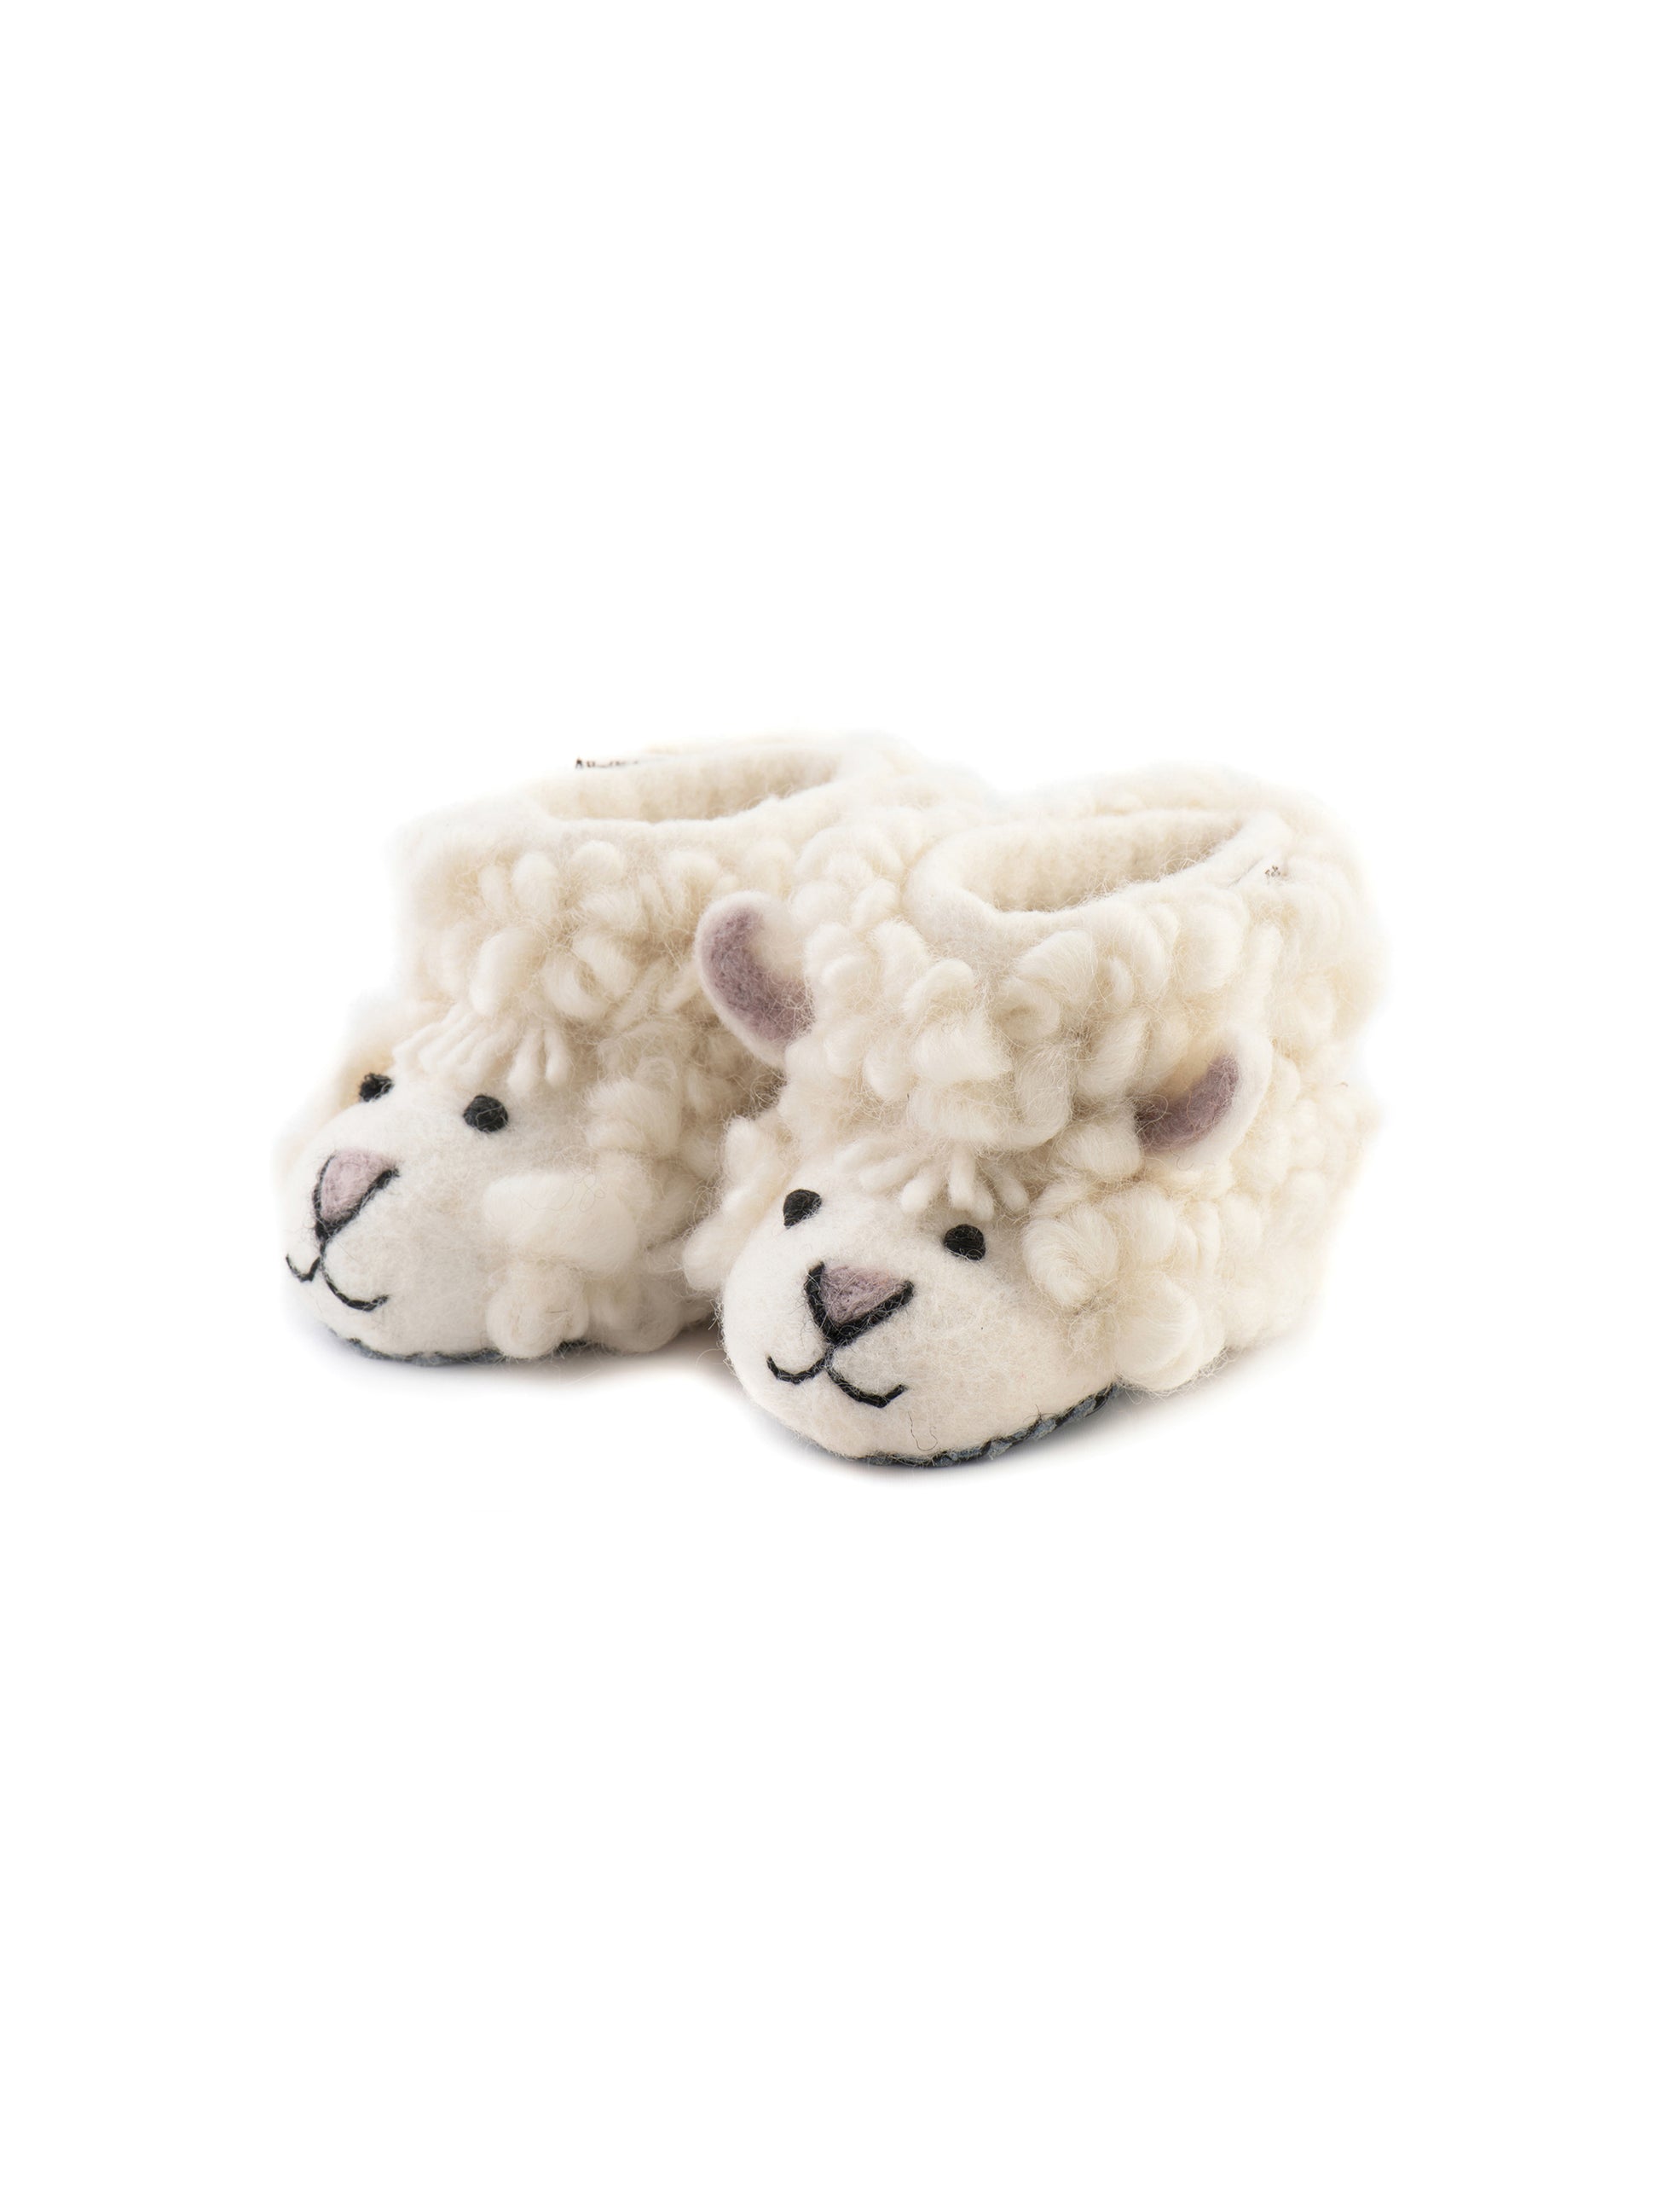 Skuffelse hit Personlig Shop the Sew Heart Felt Sheep Slippers at Weston Table